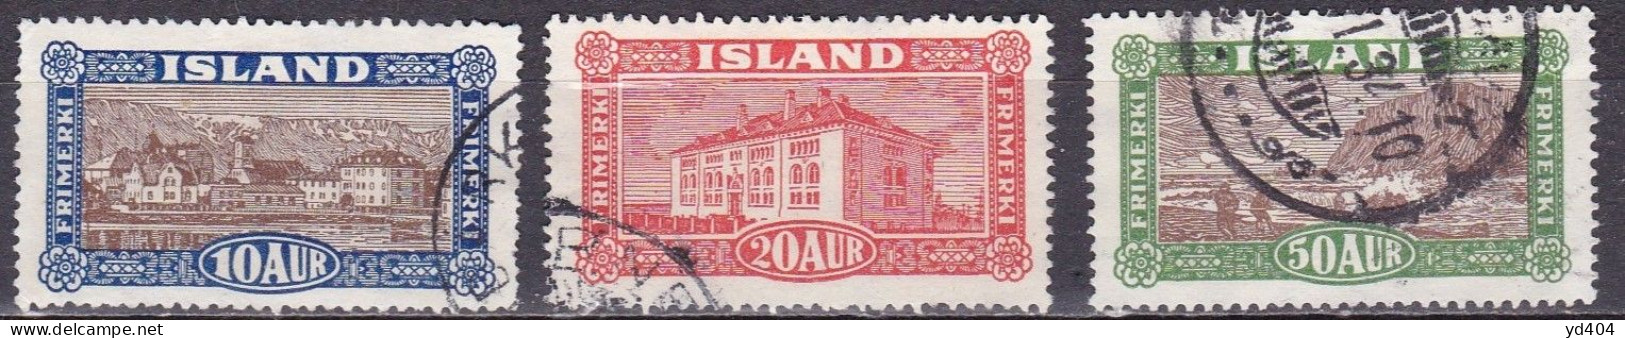 IS018F – ISLANDE – ICELAND – 1925 – PICTORIAL SET – SG # 152-155 USED 4,50 € - Used Stamps